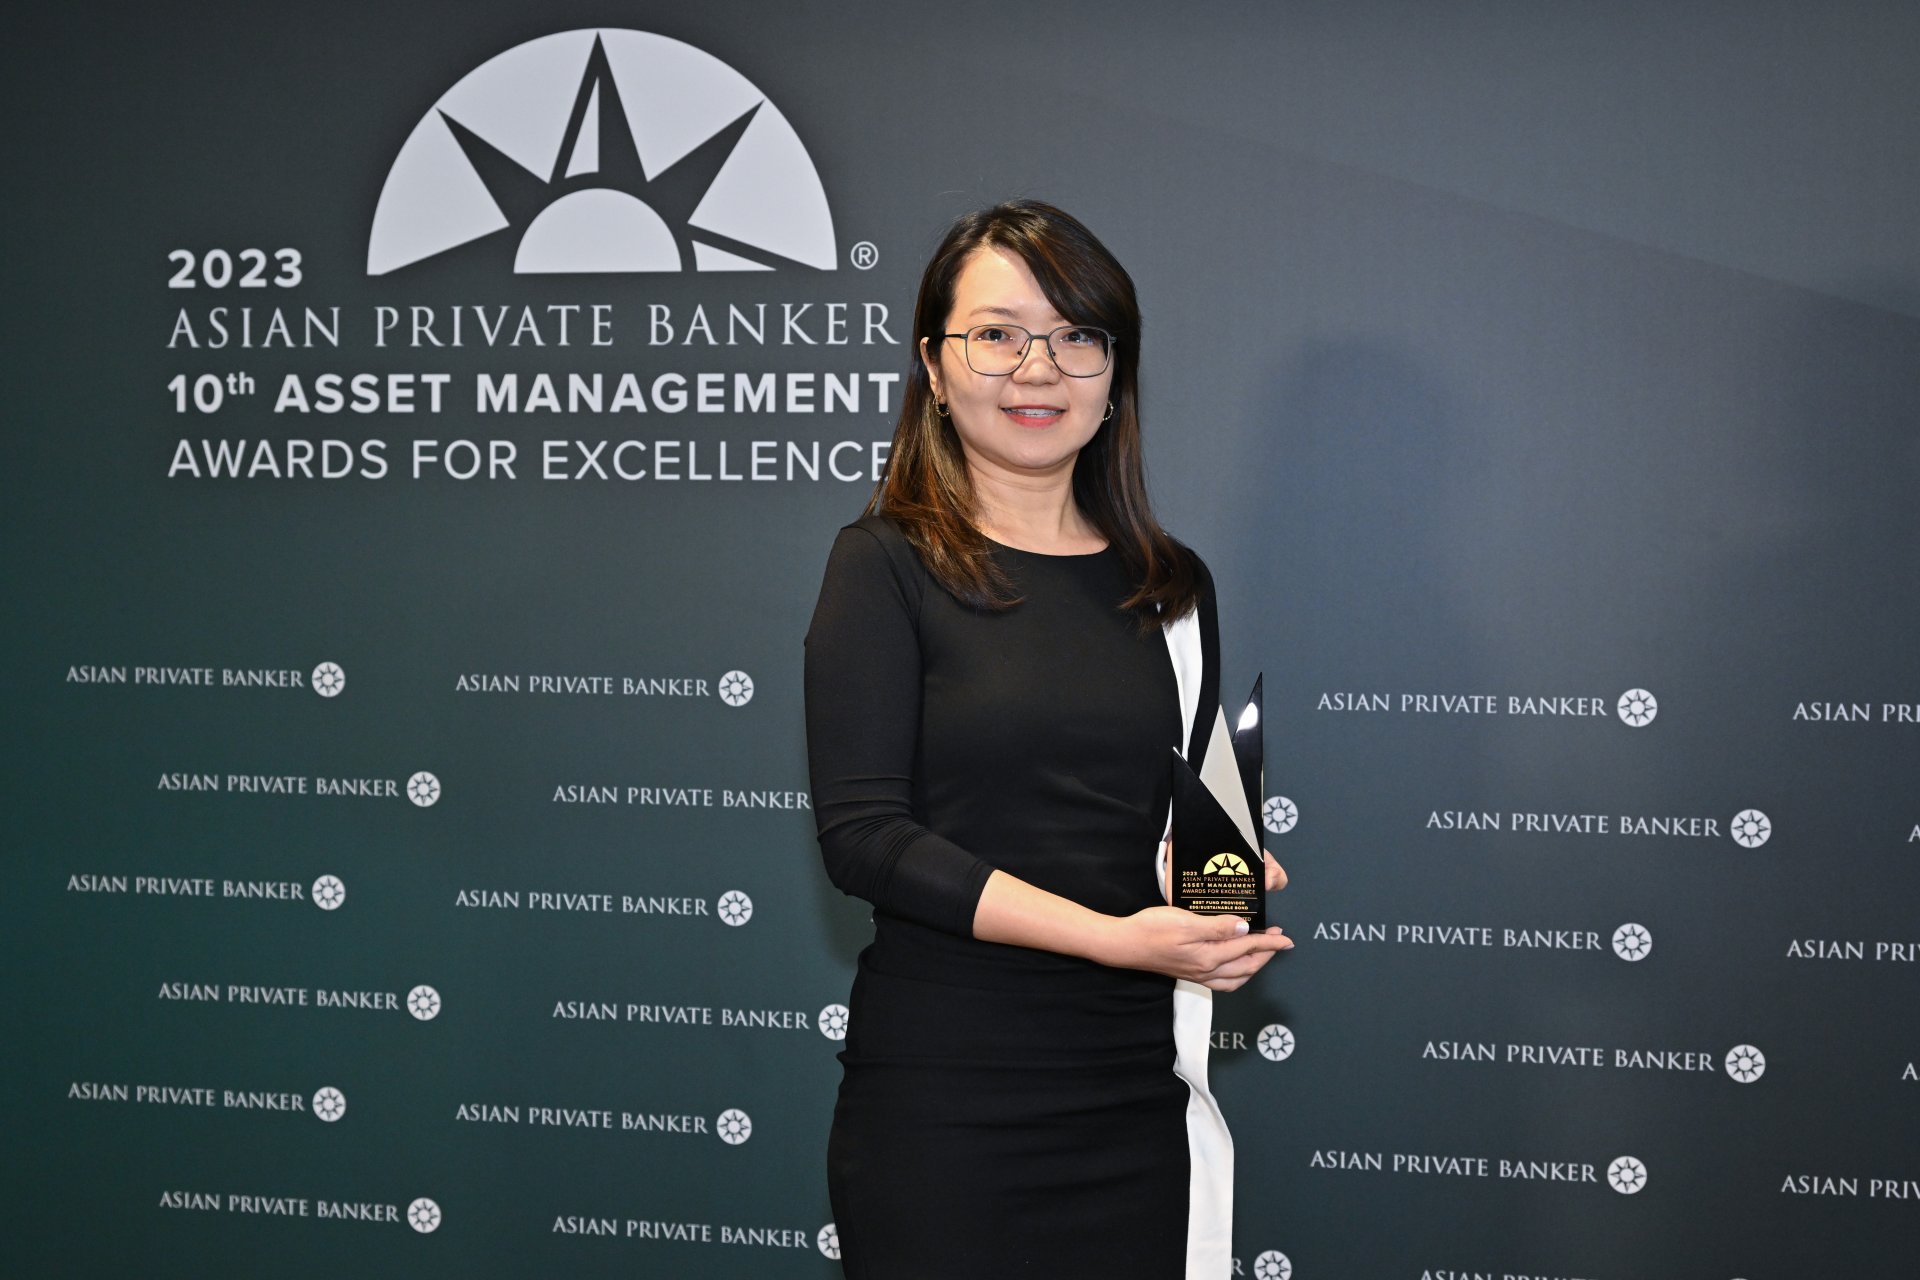 MeiLin Tan accepting the award for Best Fund Provider - ESG:Sustainable Bond on behalf of Federated Hermes